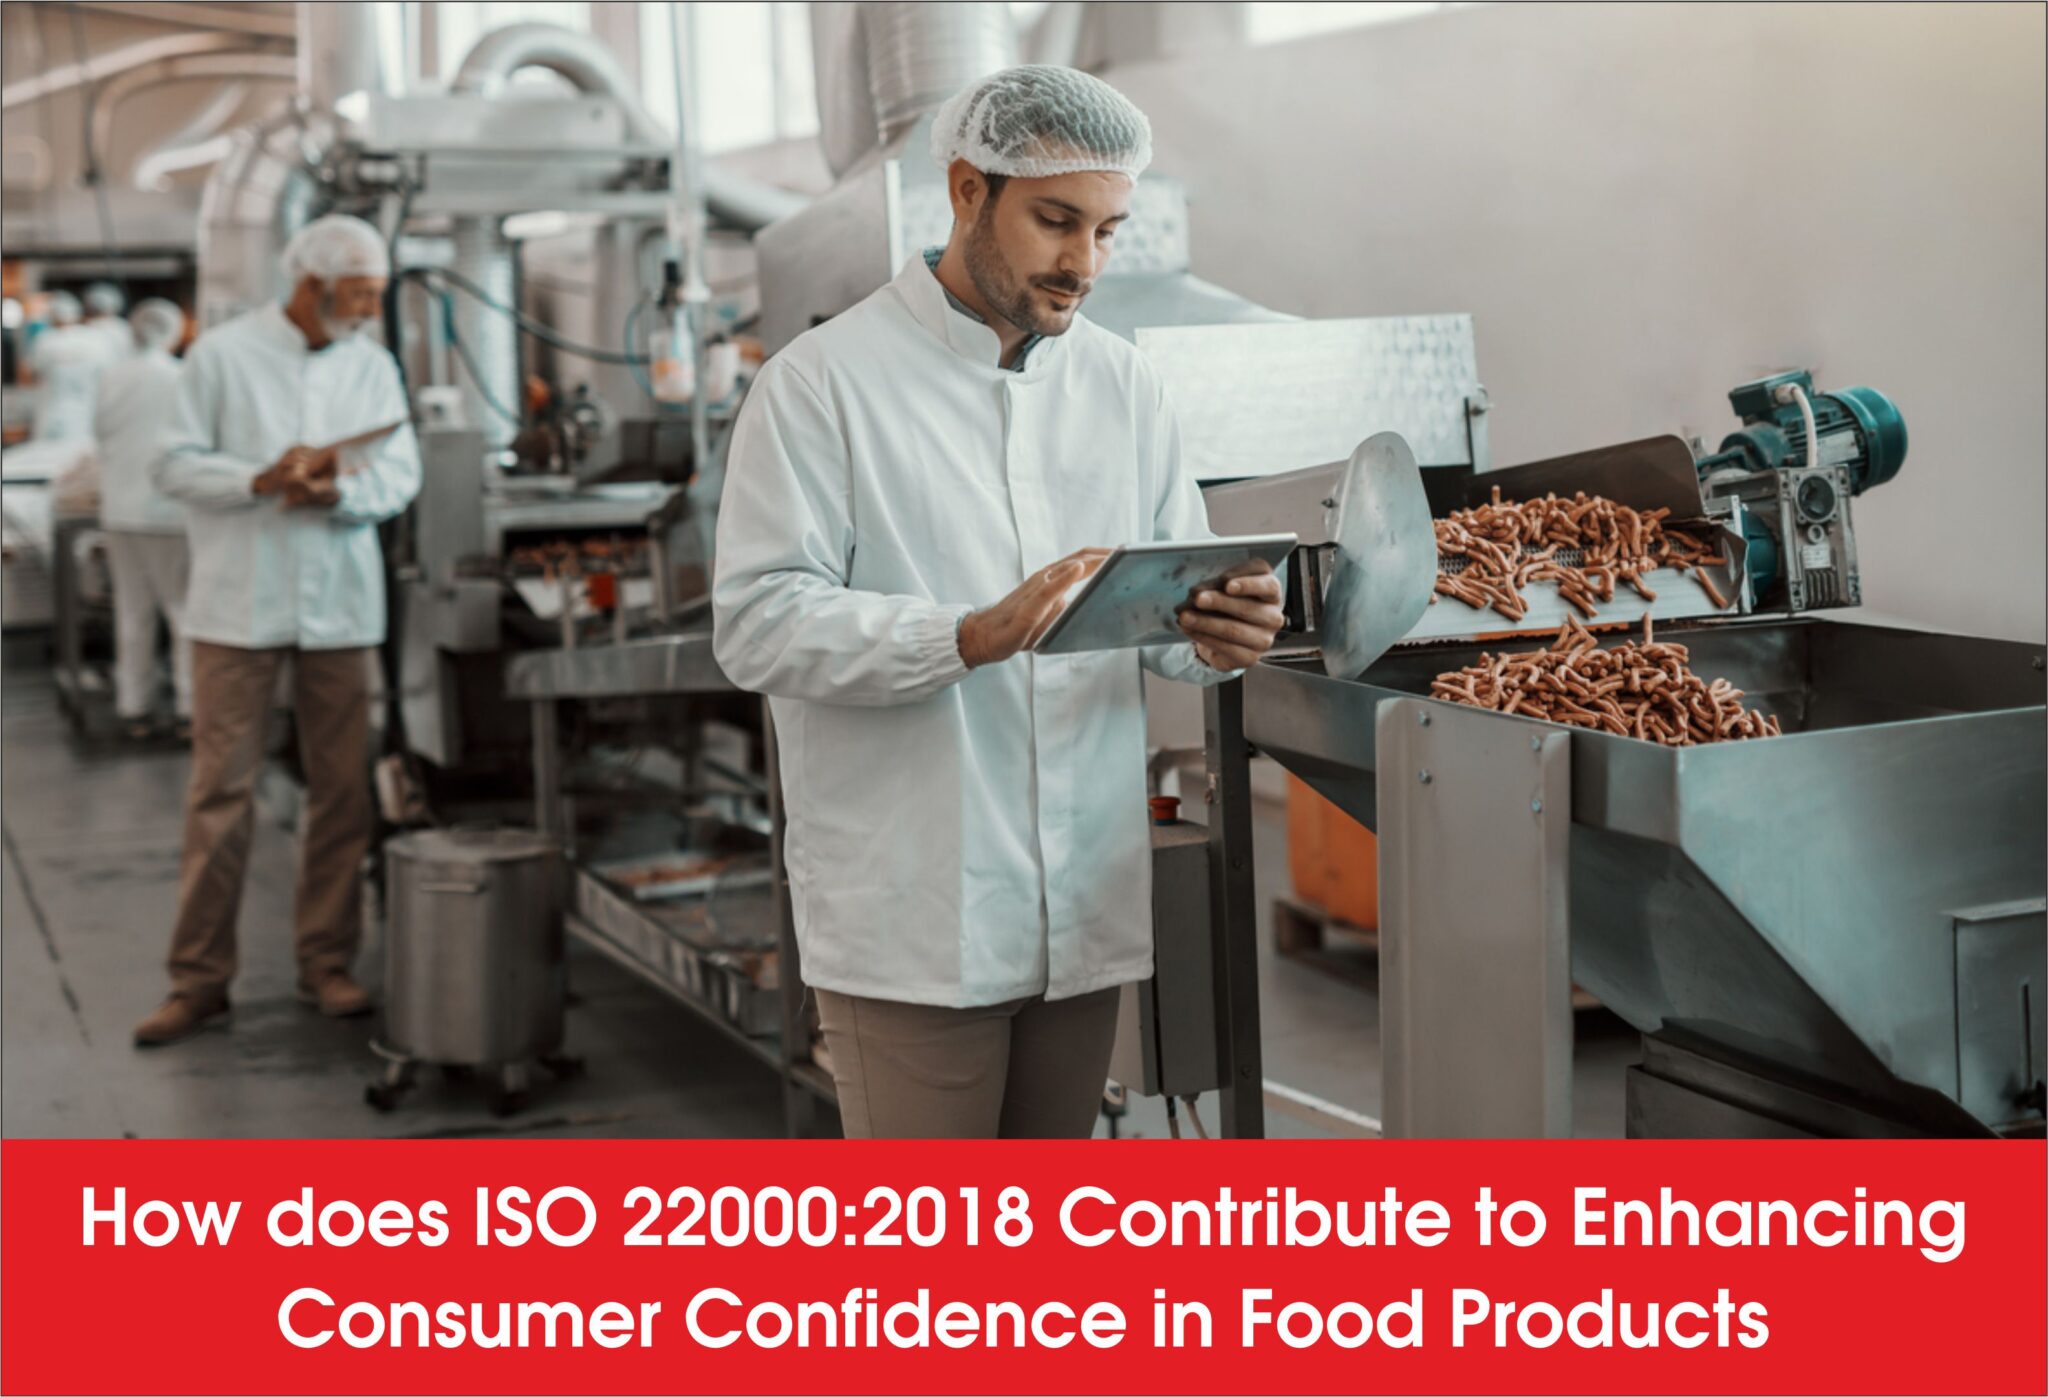 How does ISO 22000:2018 Contribute to Enhancing Consumer Confidence in Food Products?